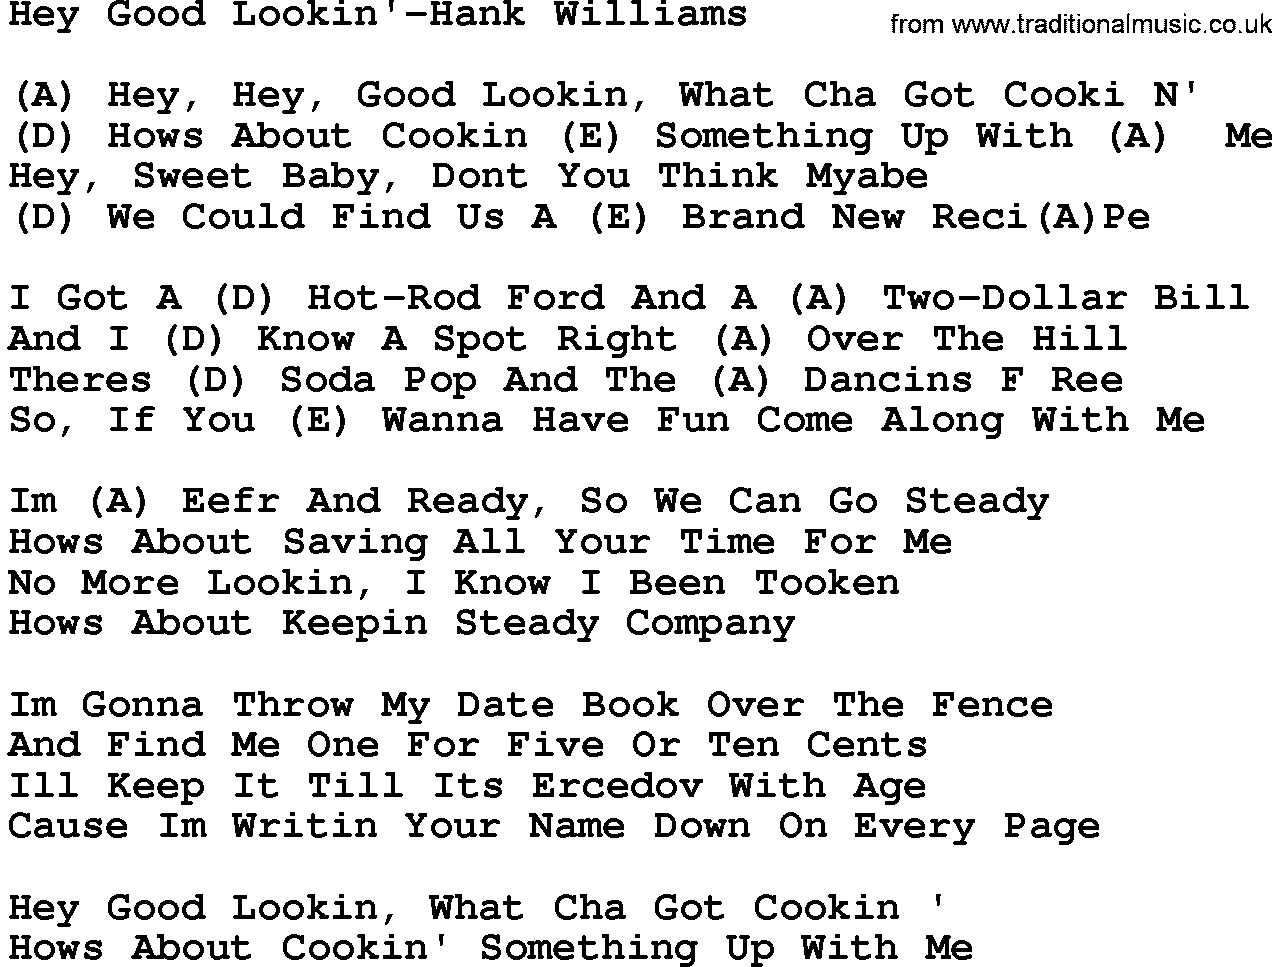 Country music song: Hey Good Lookin'-Hank Williams lyrics and chords